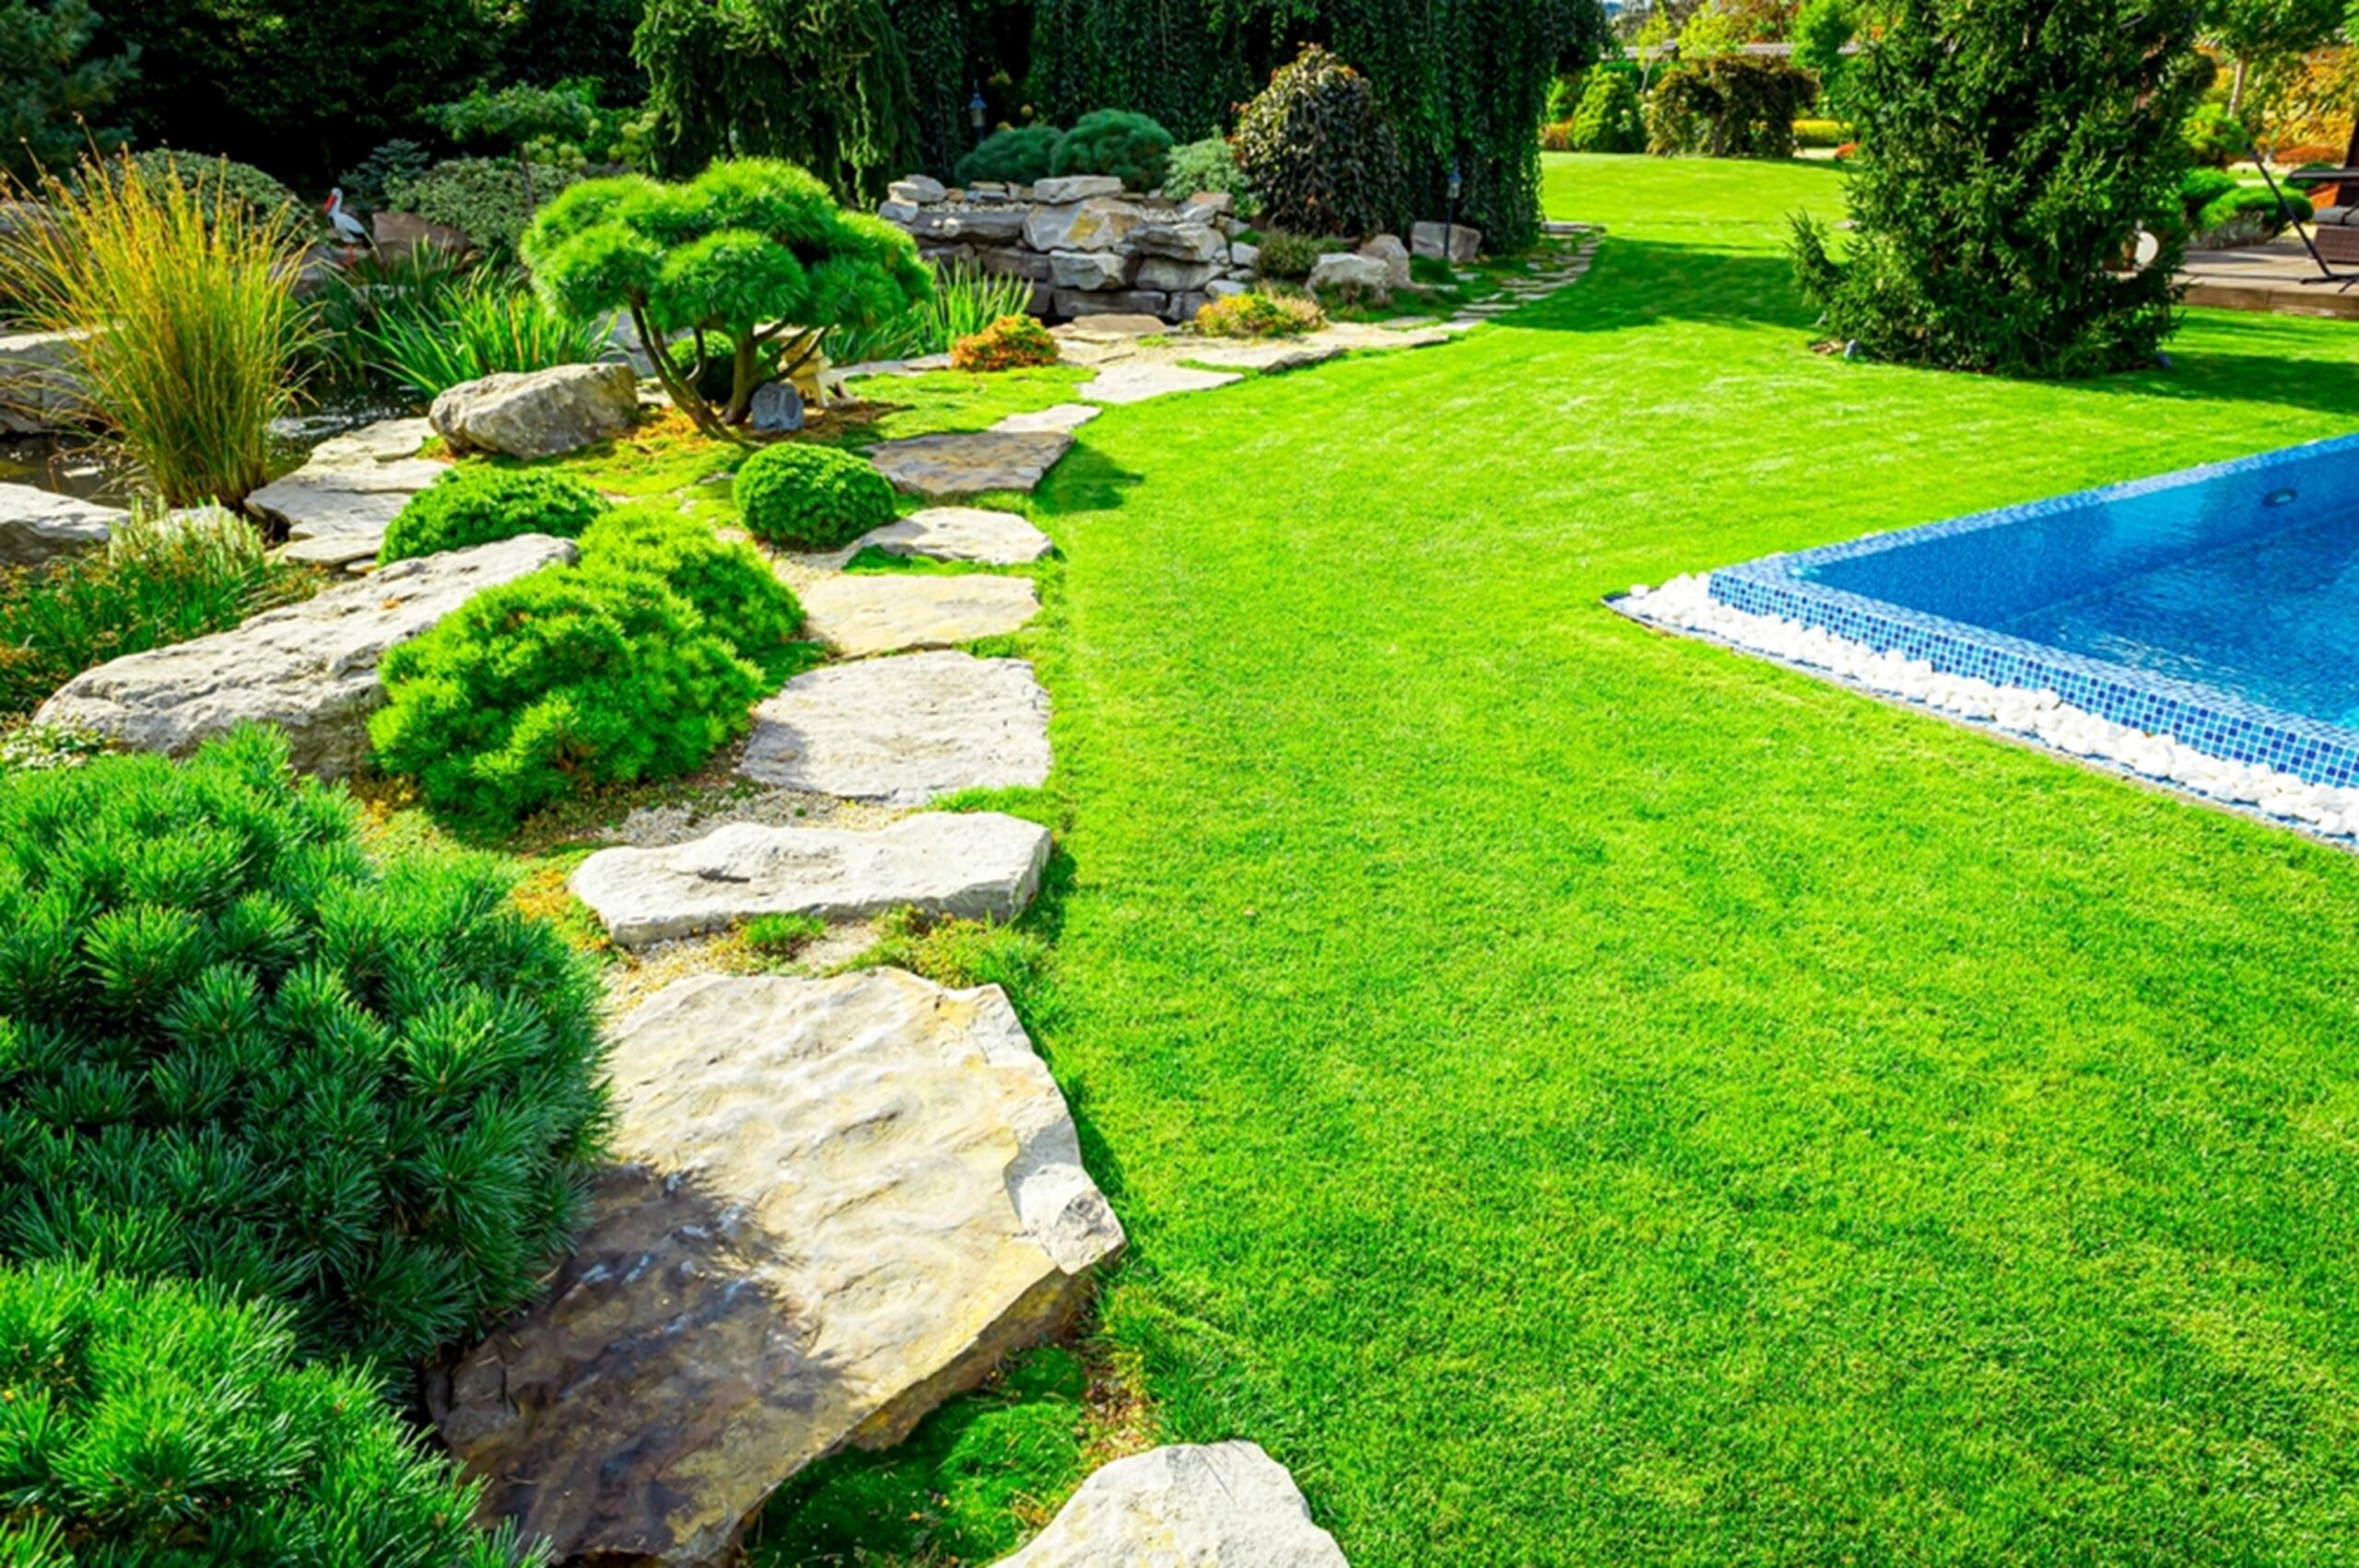 The Woodlands’ Premier Lawn Service: Trustworthy Experts for a Beautiful Yard